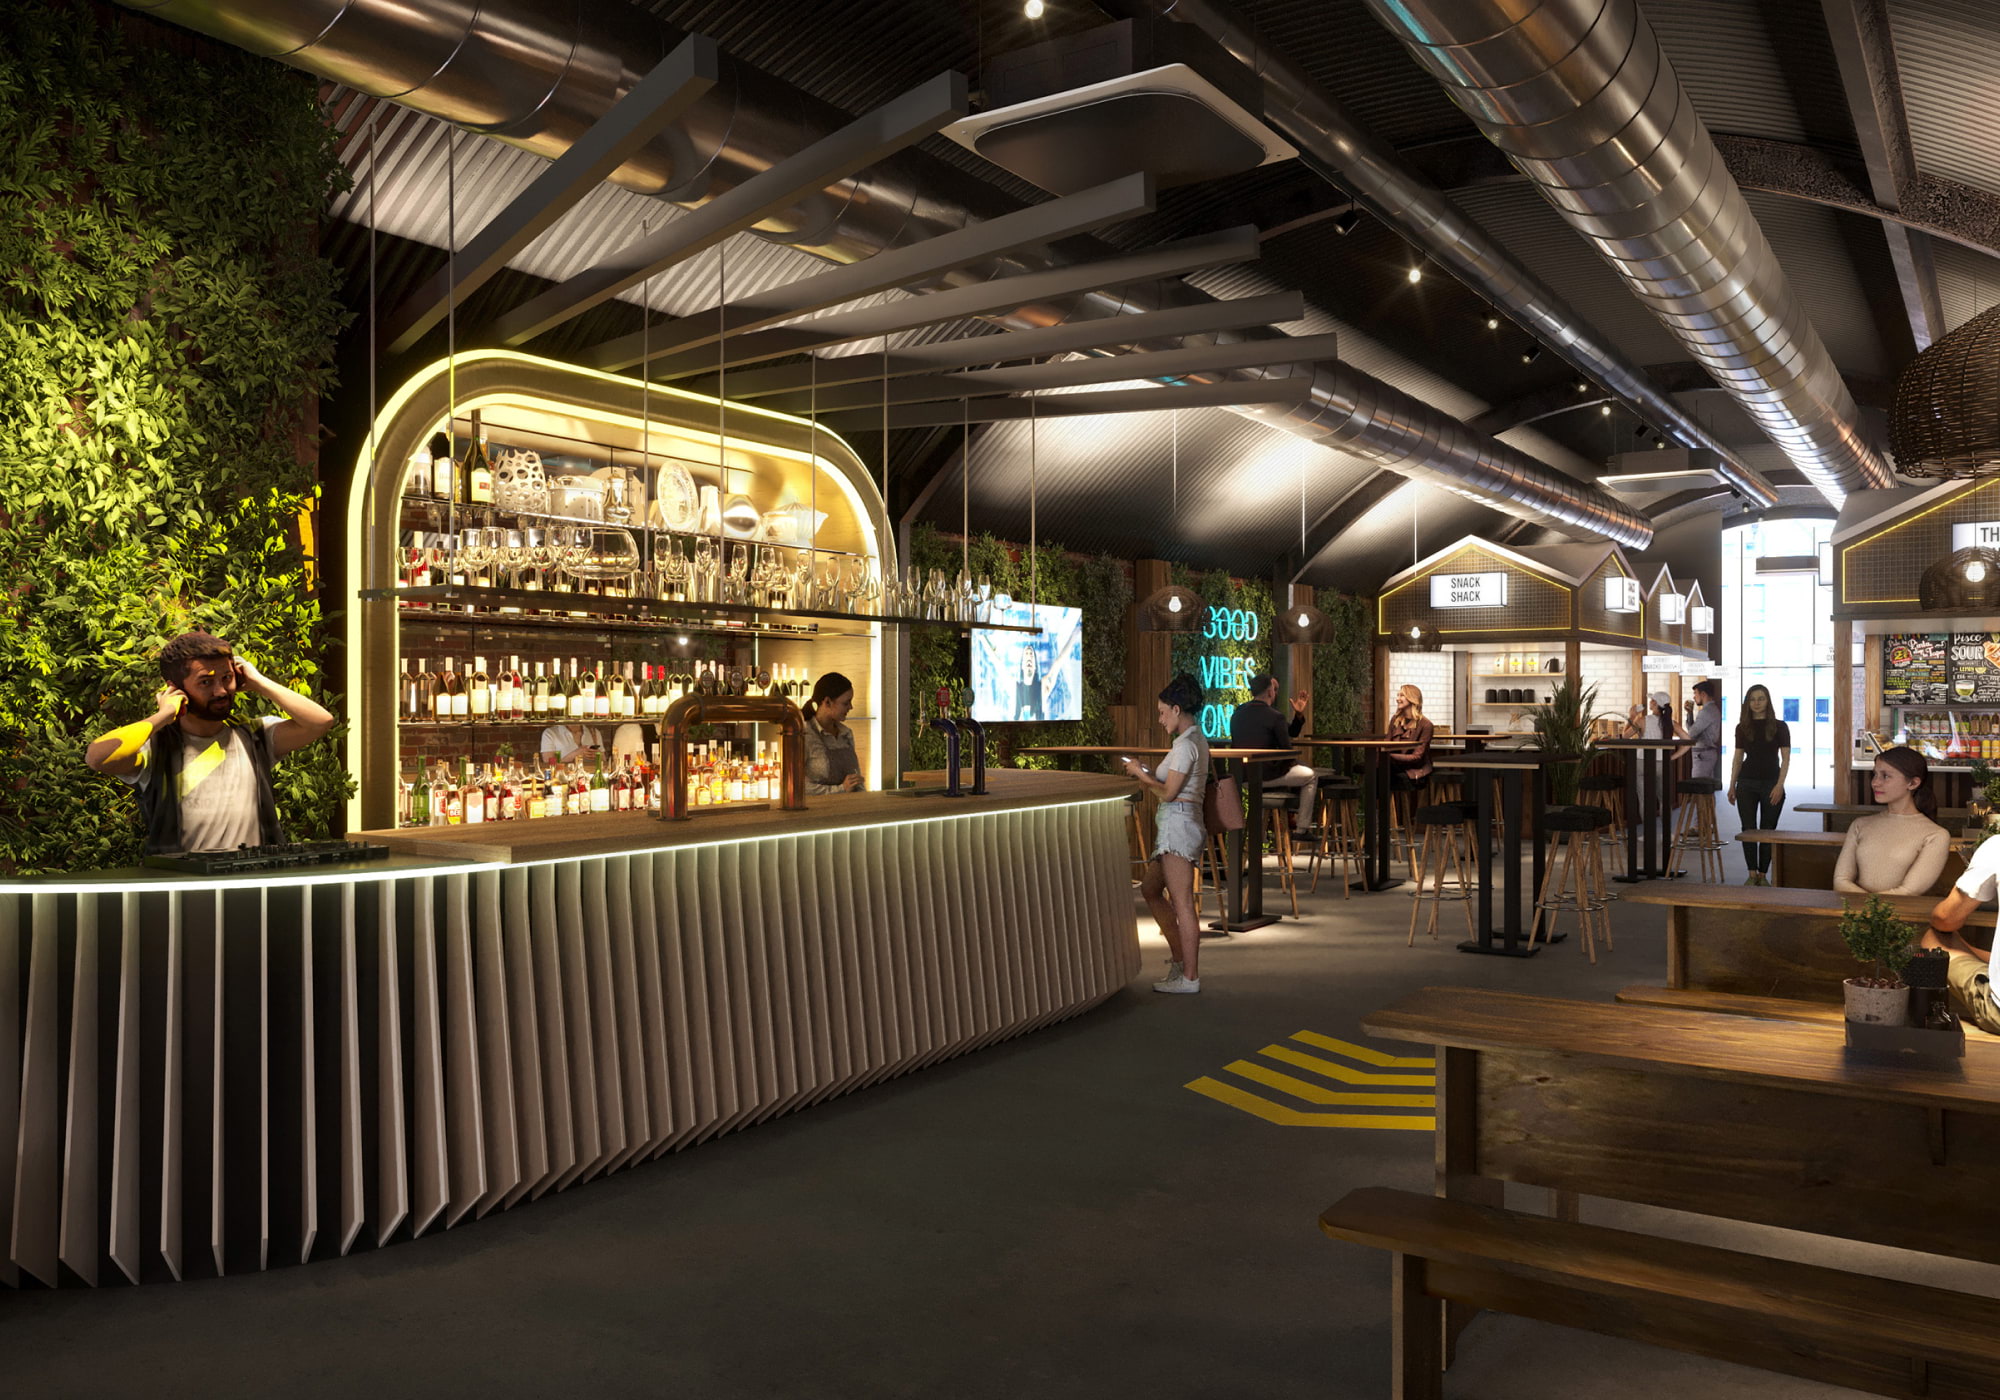 New food hall alert: Market Place Vauxhall is now open